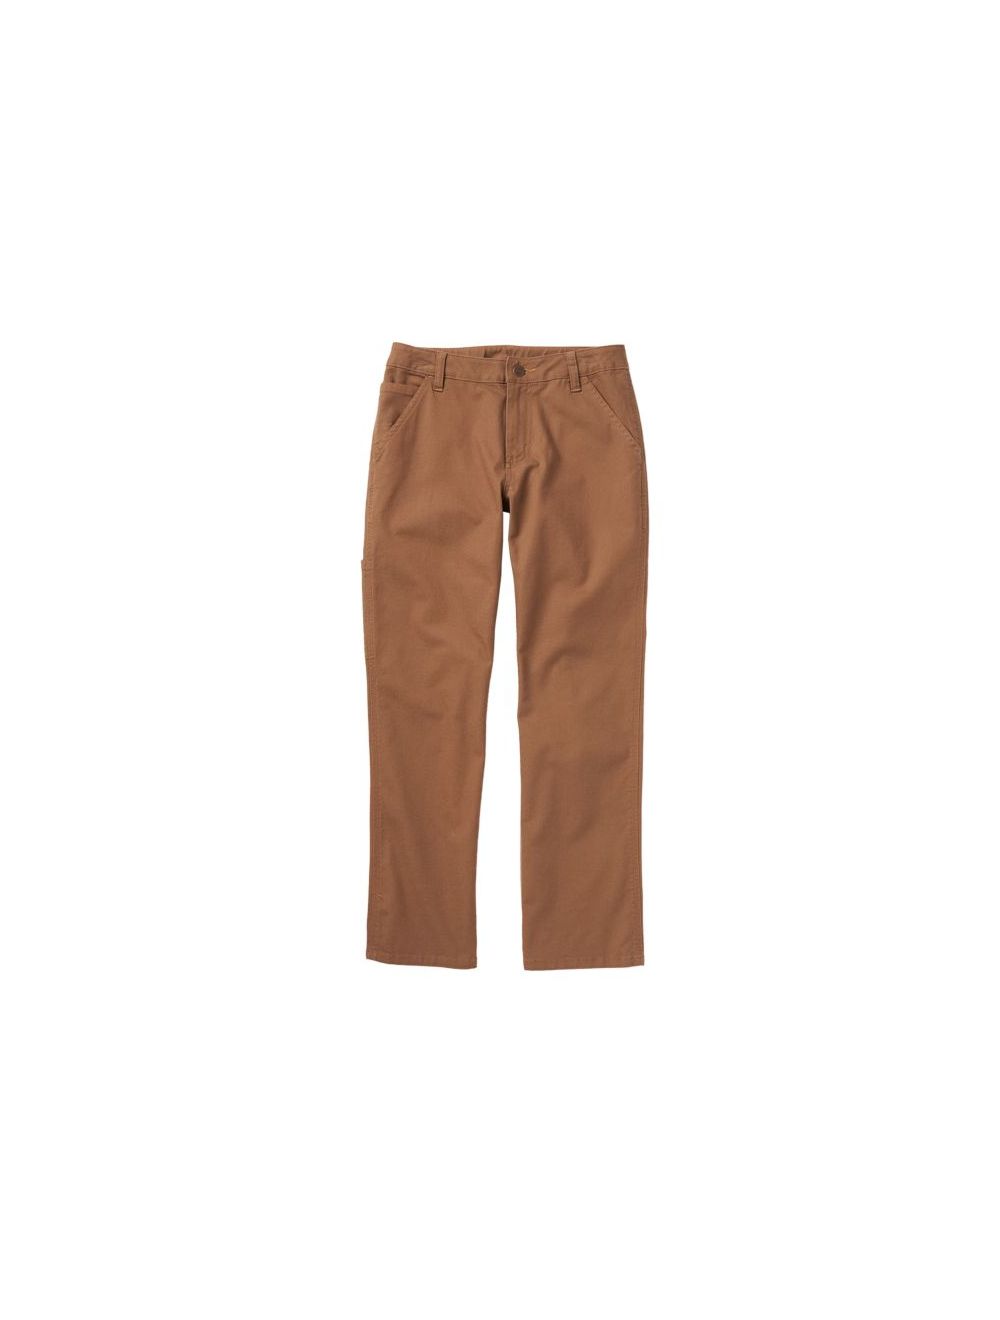 Rugged Flex® Relaxed Fit Canvas 5-Pocket Work Pant | Carhartt Reworked